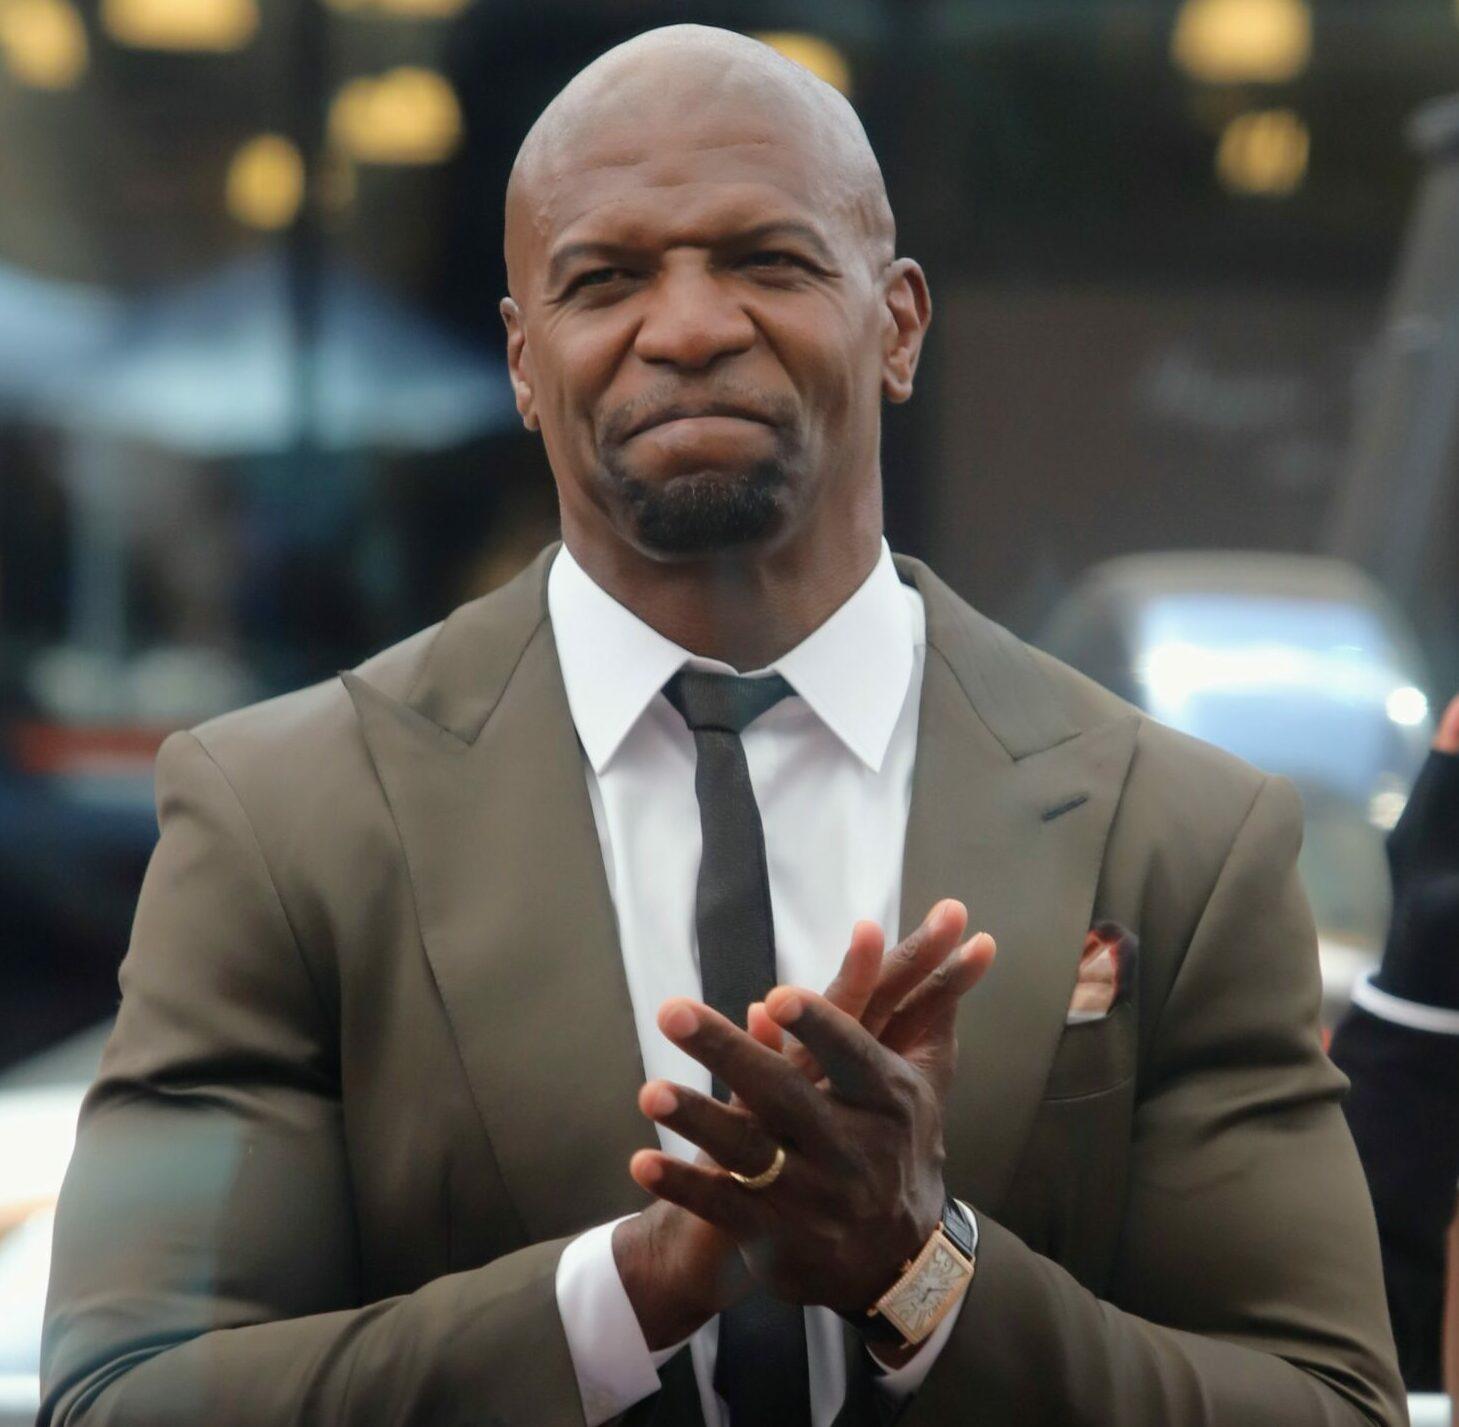 Terry Crews receives his Hollywood star with Tachina Arnold singing Happy Birthday along with Howie Mandell